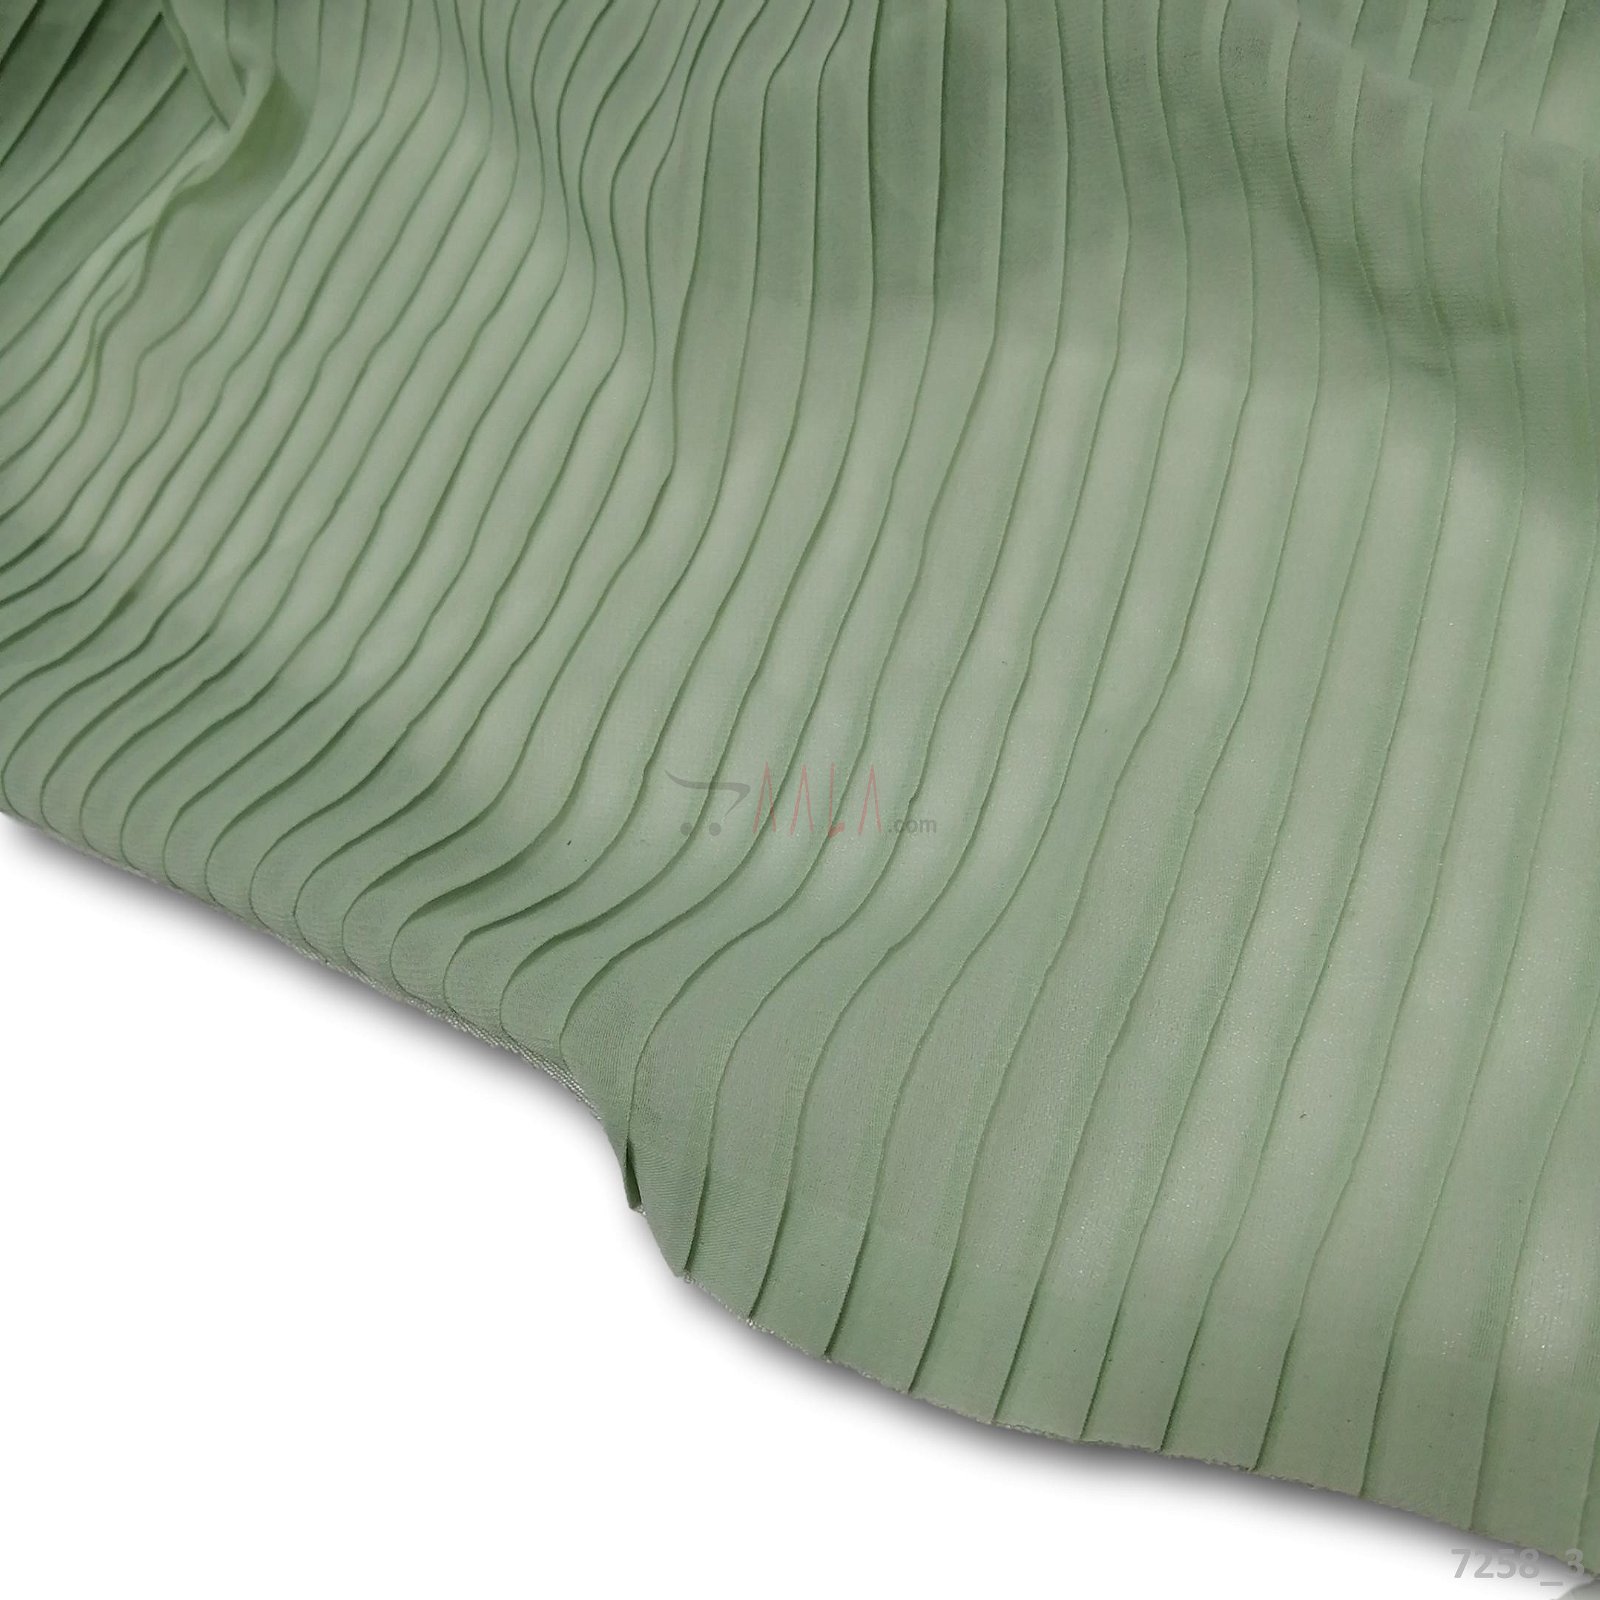 Pleated Georgette Poly-ester 44-Inches GREEN Per-Metre #7258